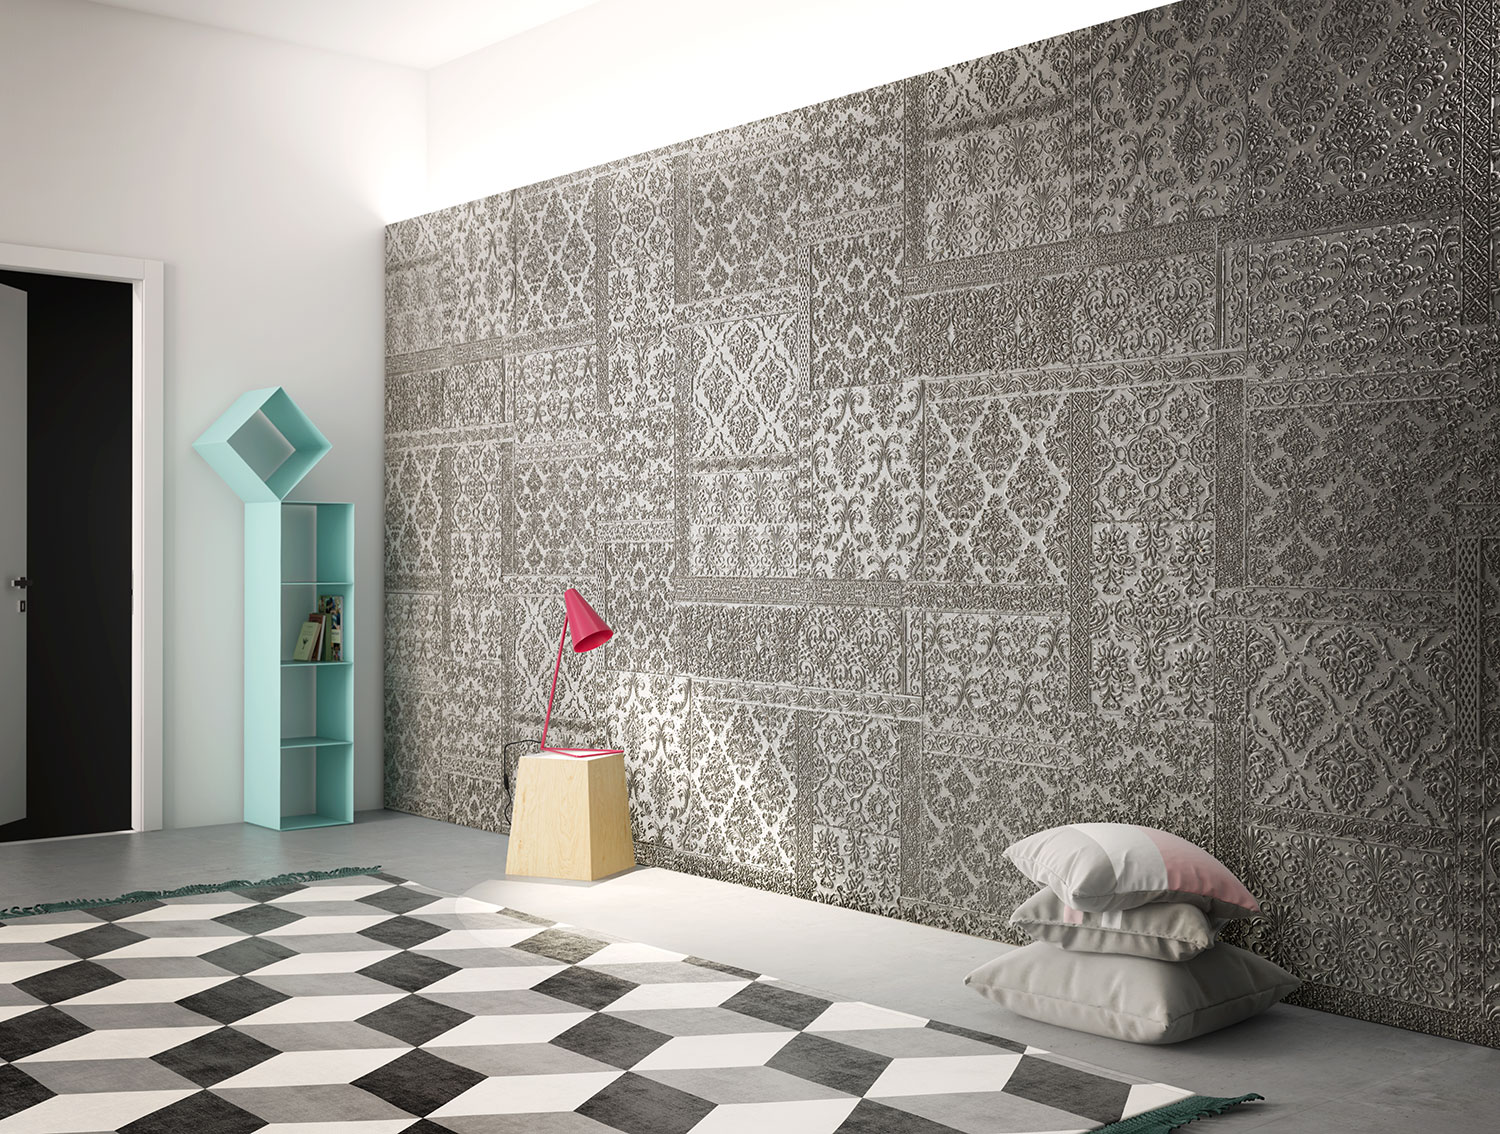 gray wall panels with engraved vintage designs